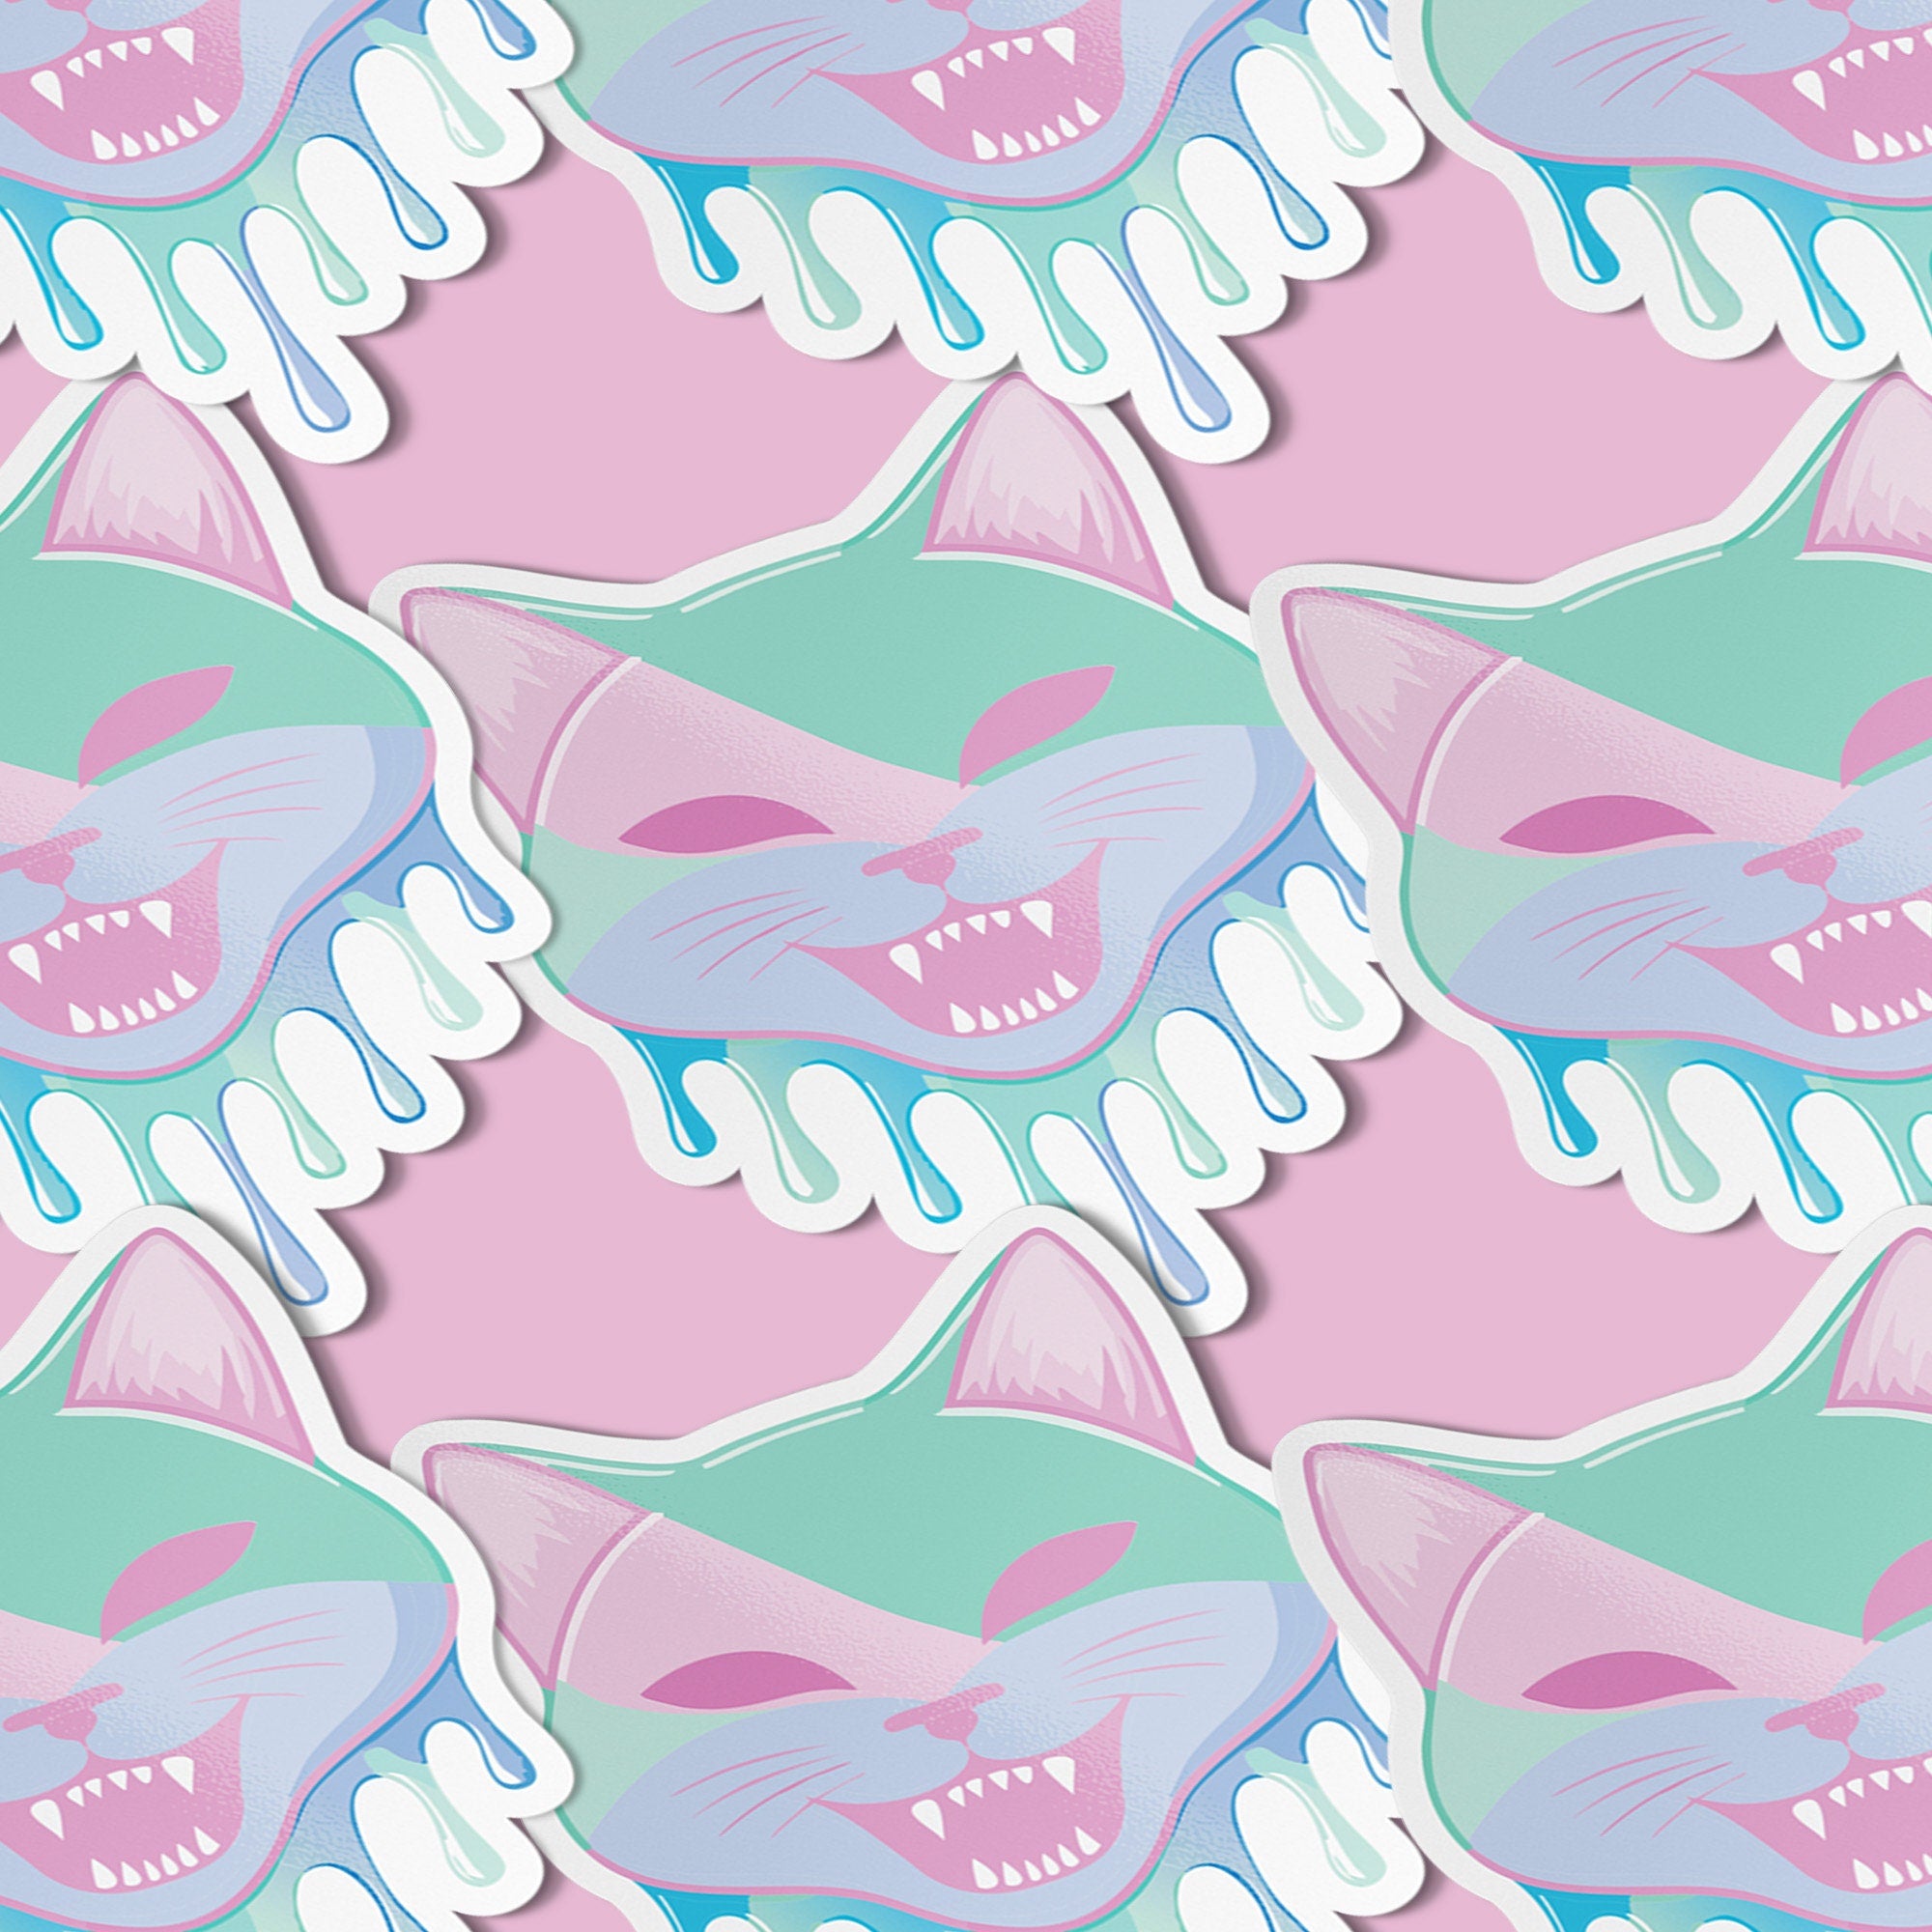 Adorable pastel kitty sticker with a cheeky fanged smile, perfect for adding a playful touch to your accessories. Available in Prism, Gem, and Glitter finishes. Handmade in Austin, Texas.